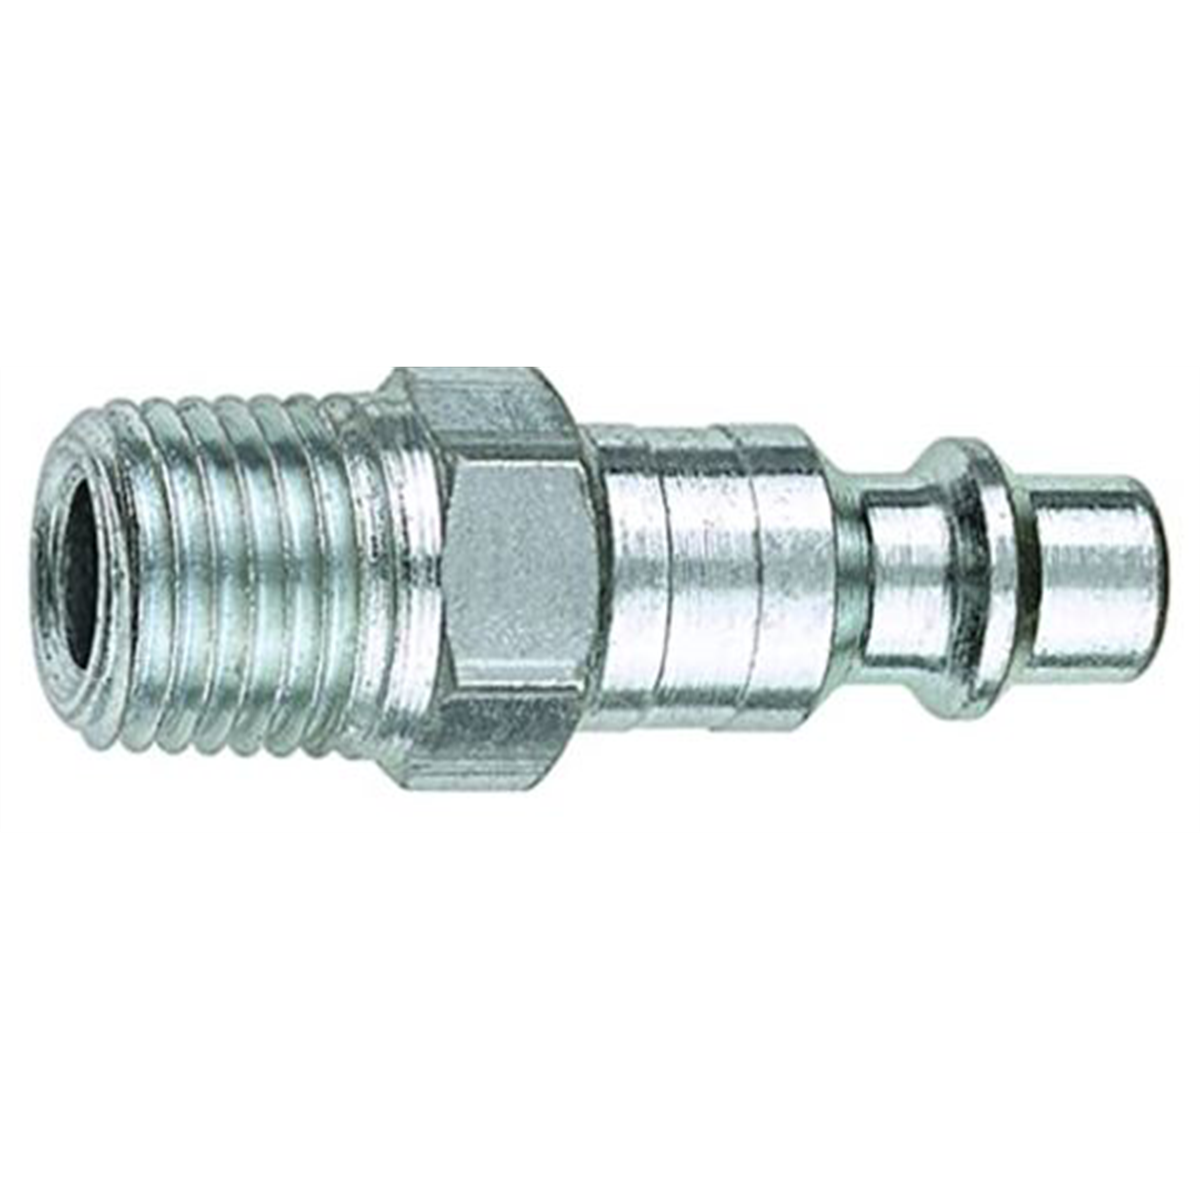 1/4" Coupler Plug with Male 1/4" Threads I/M Industrial- Pack of